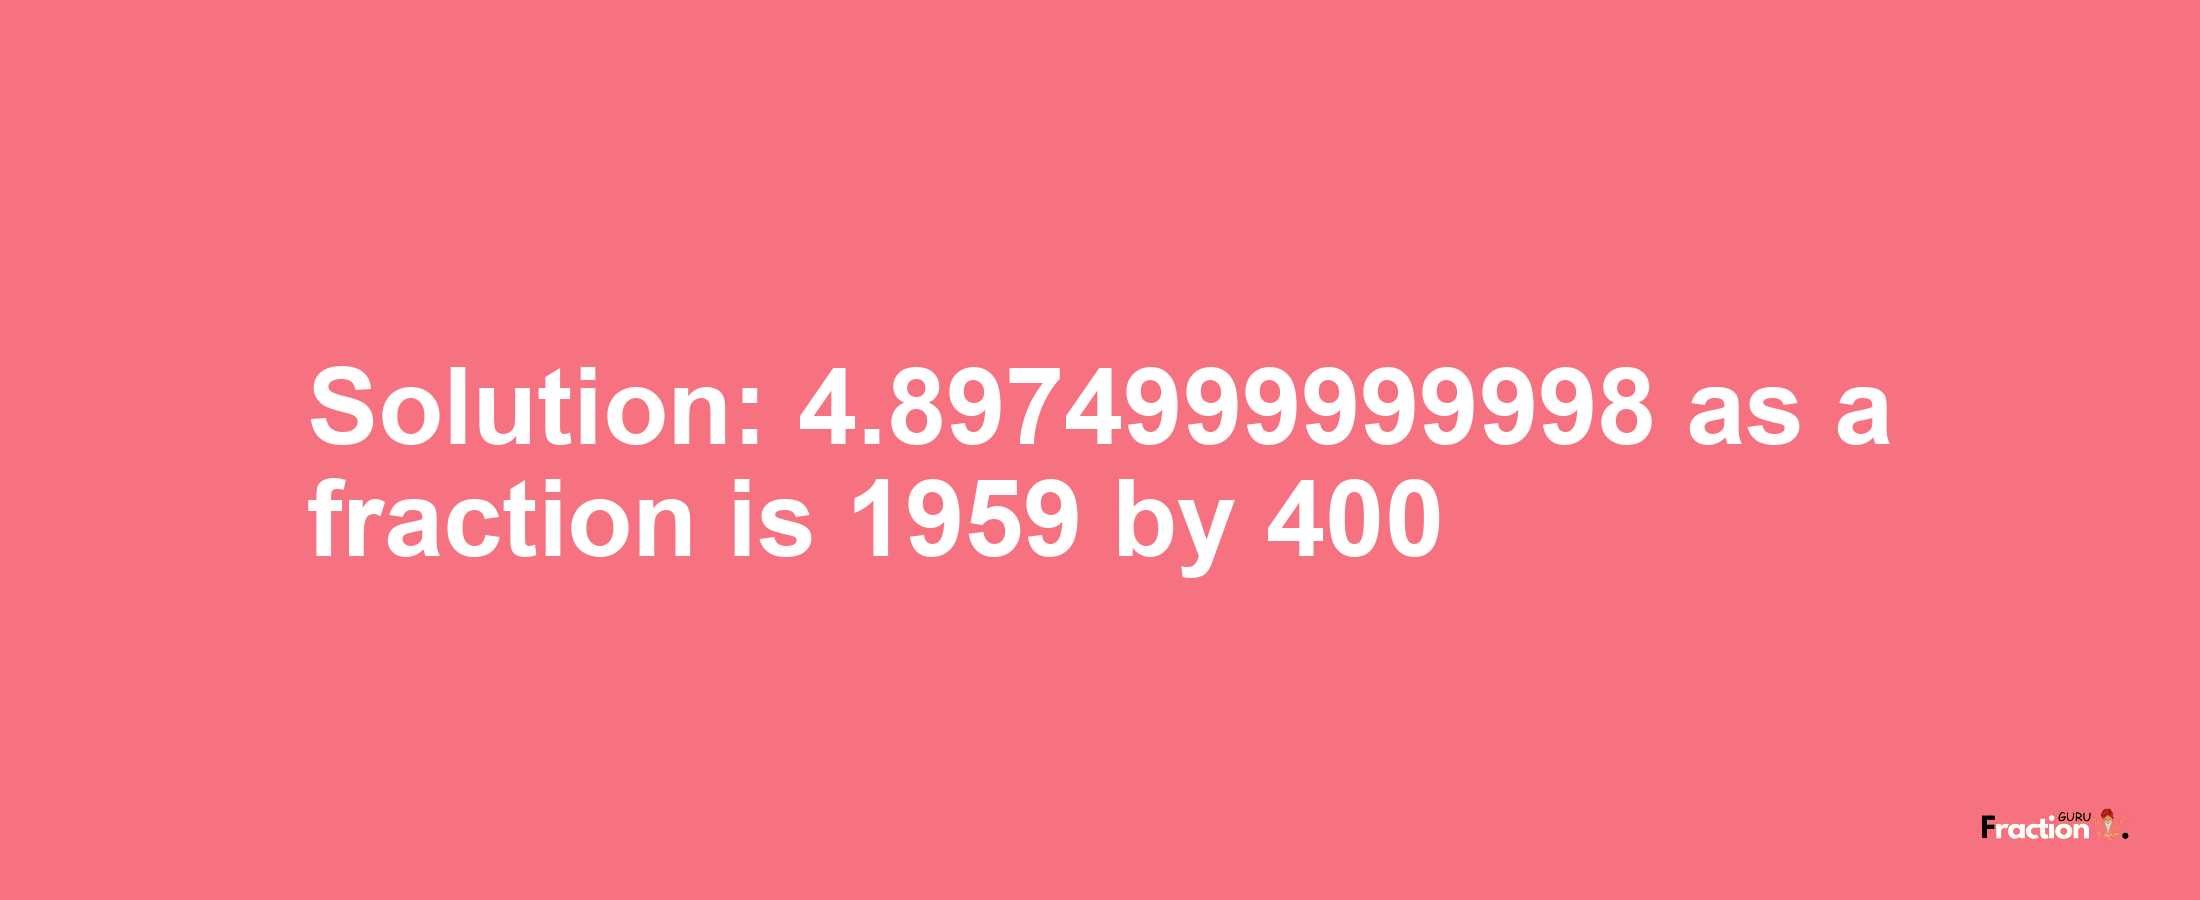 Solution:4.8974999999998 as a fraction is 1959/400